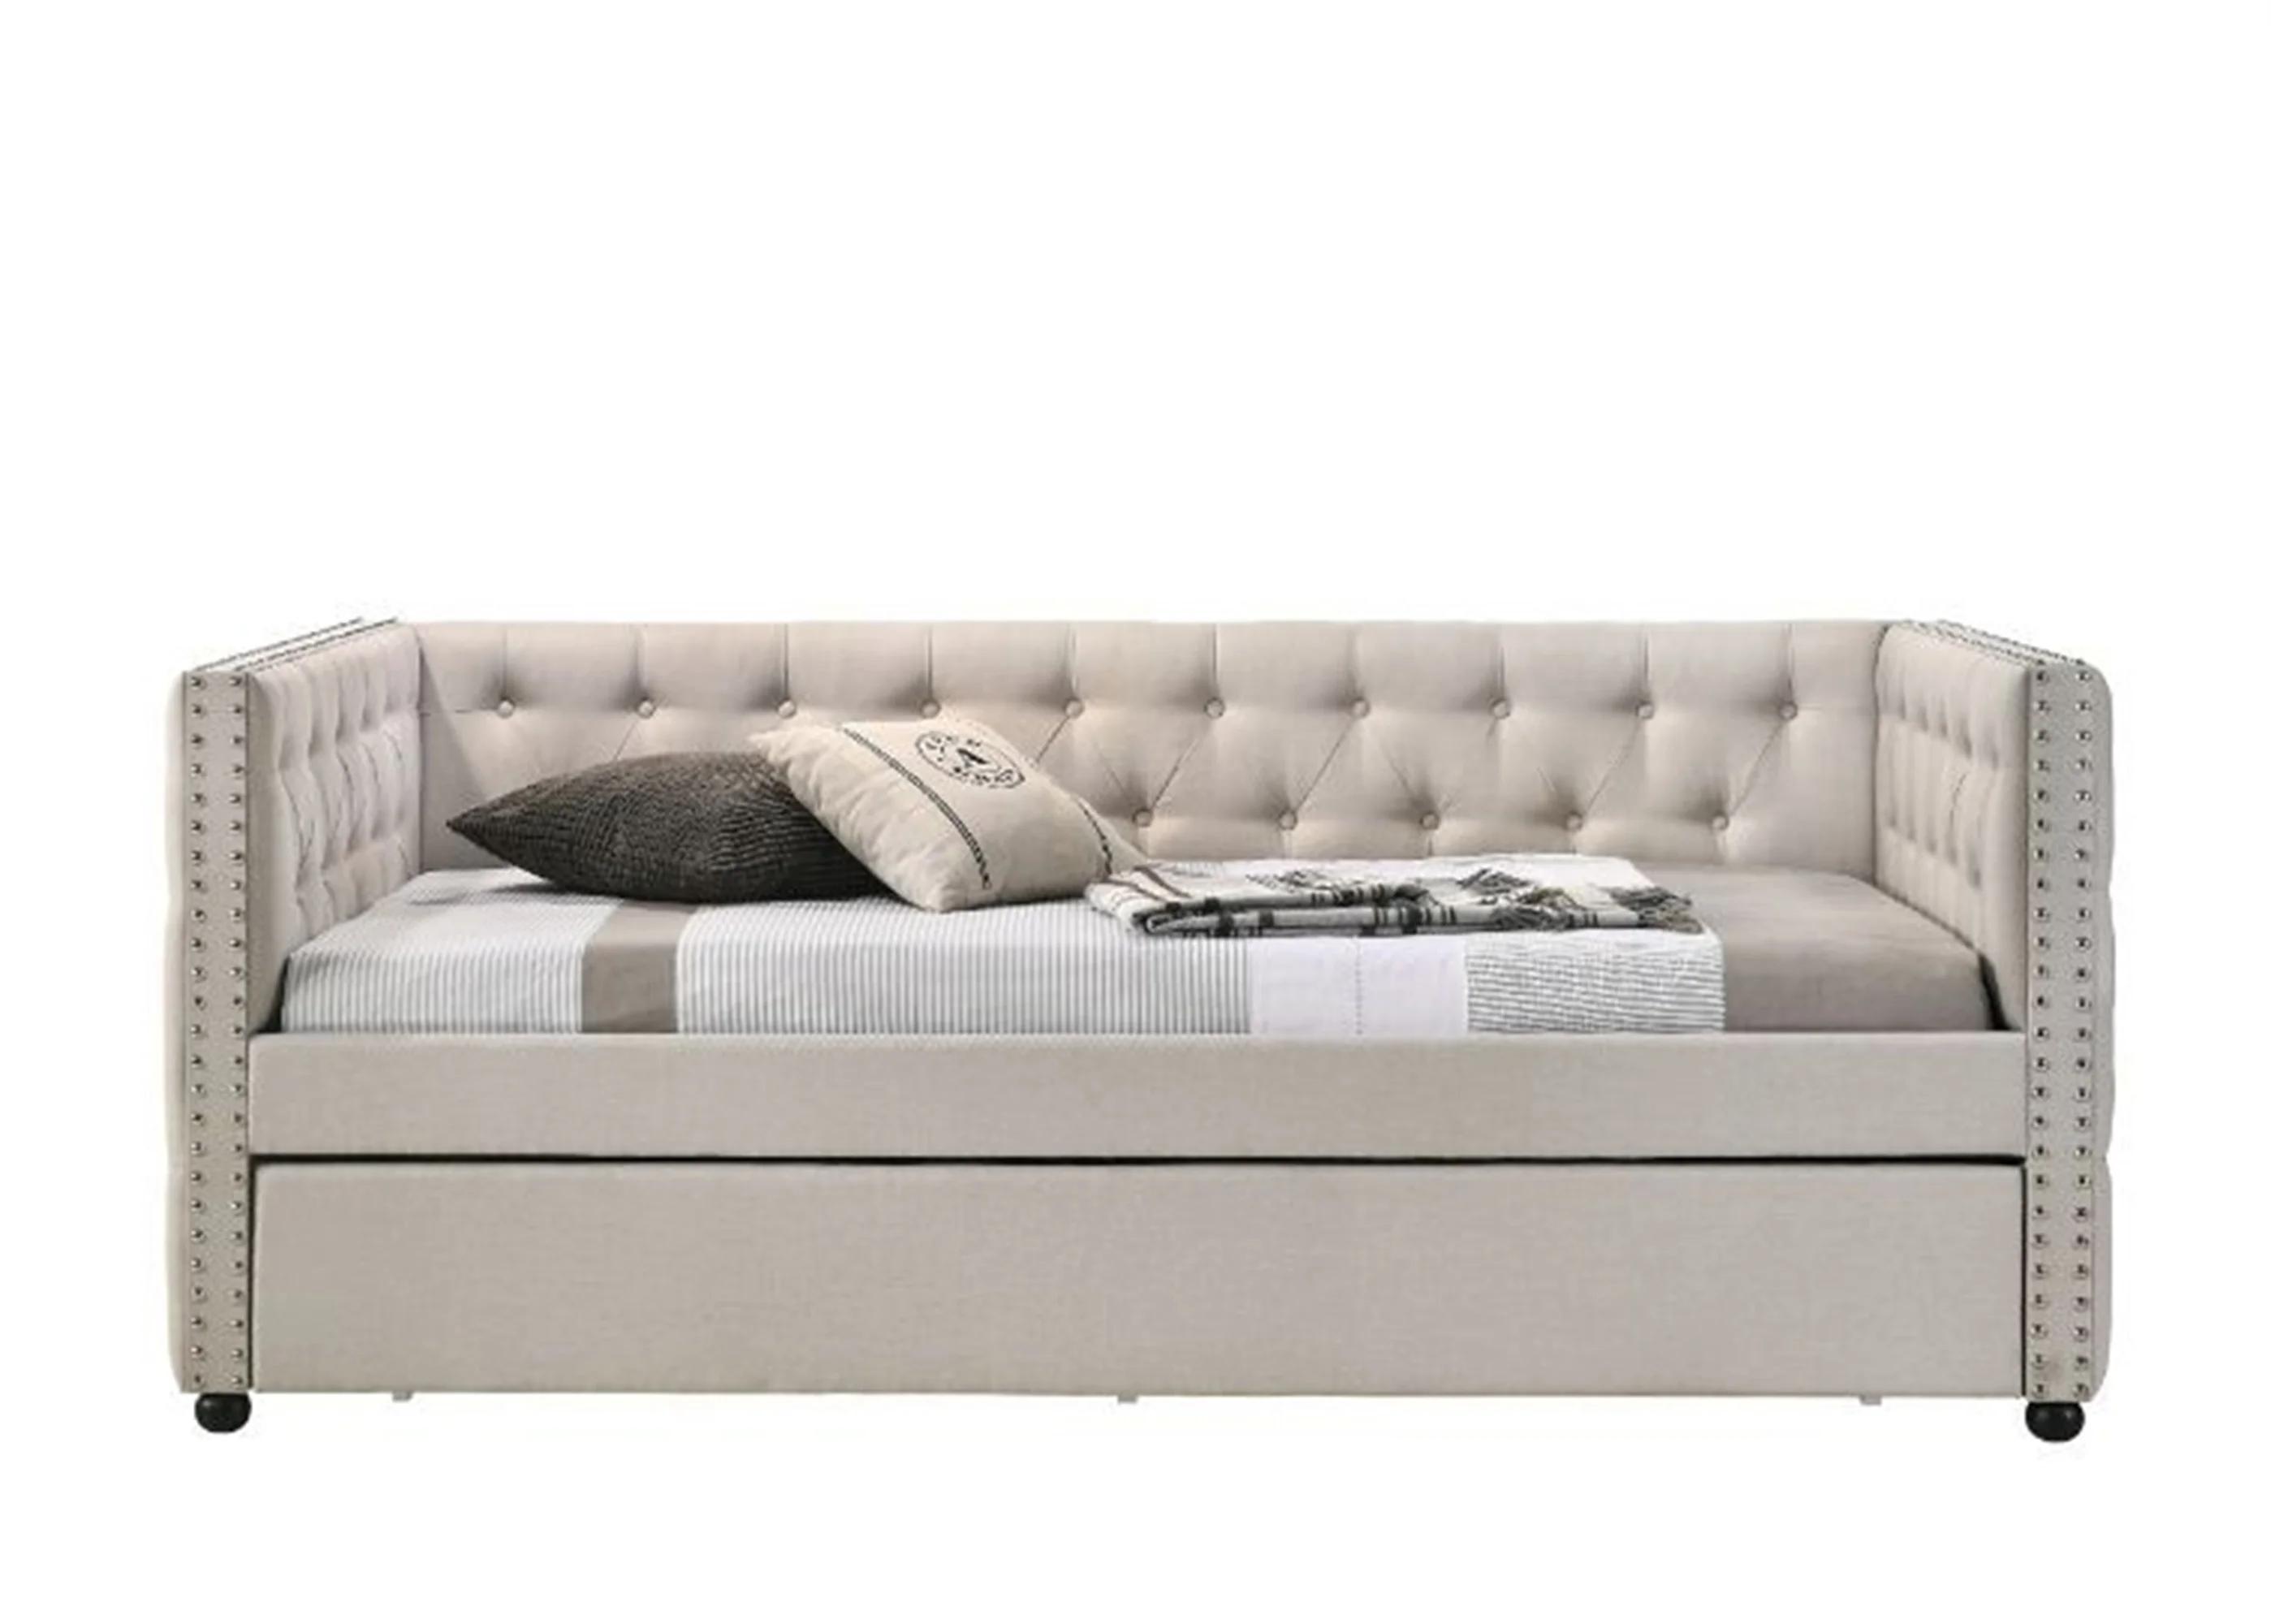 Transitional Daybed w/ trundle Romona 39445 in Beige Fabric